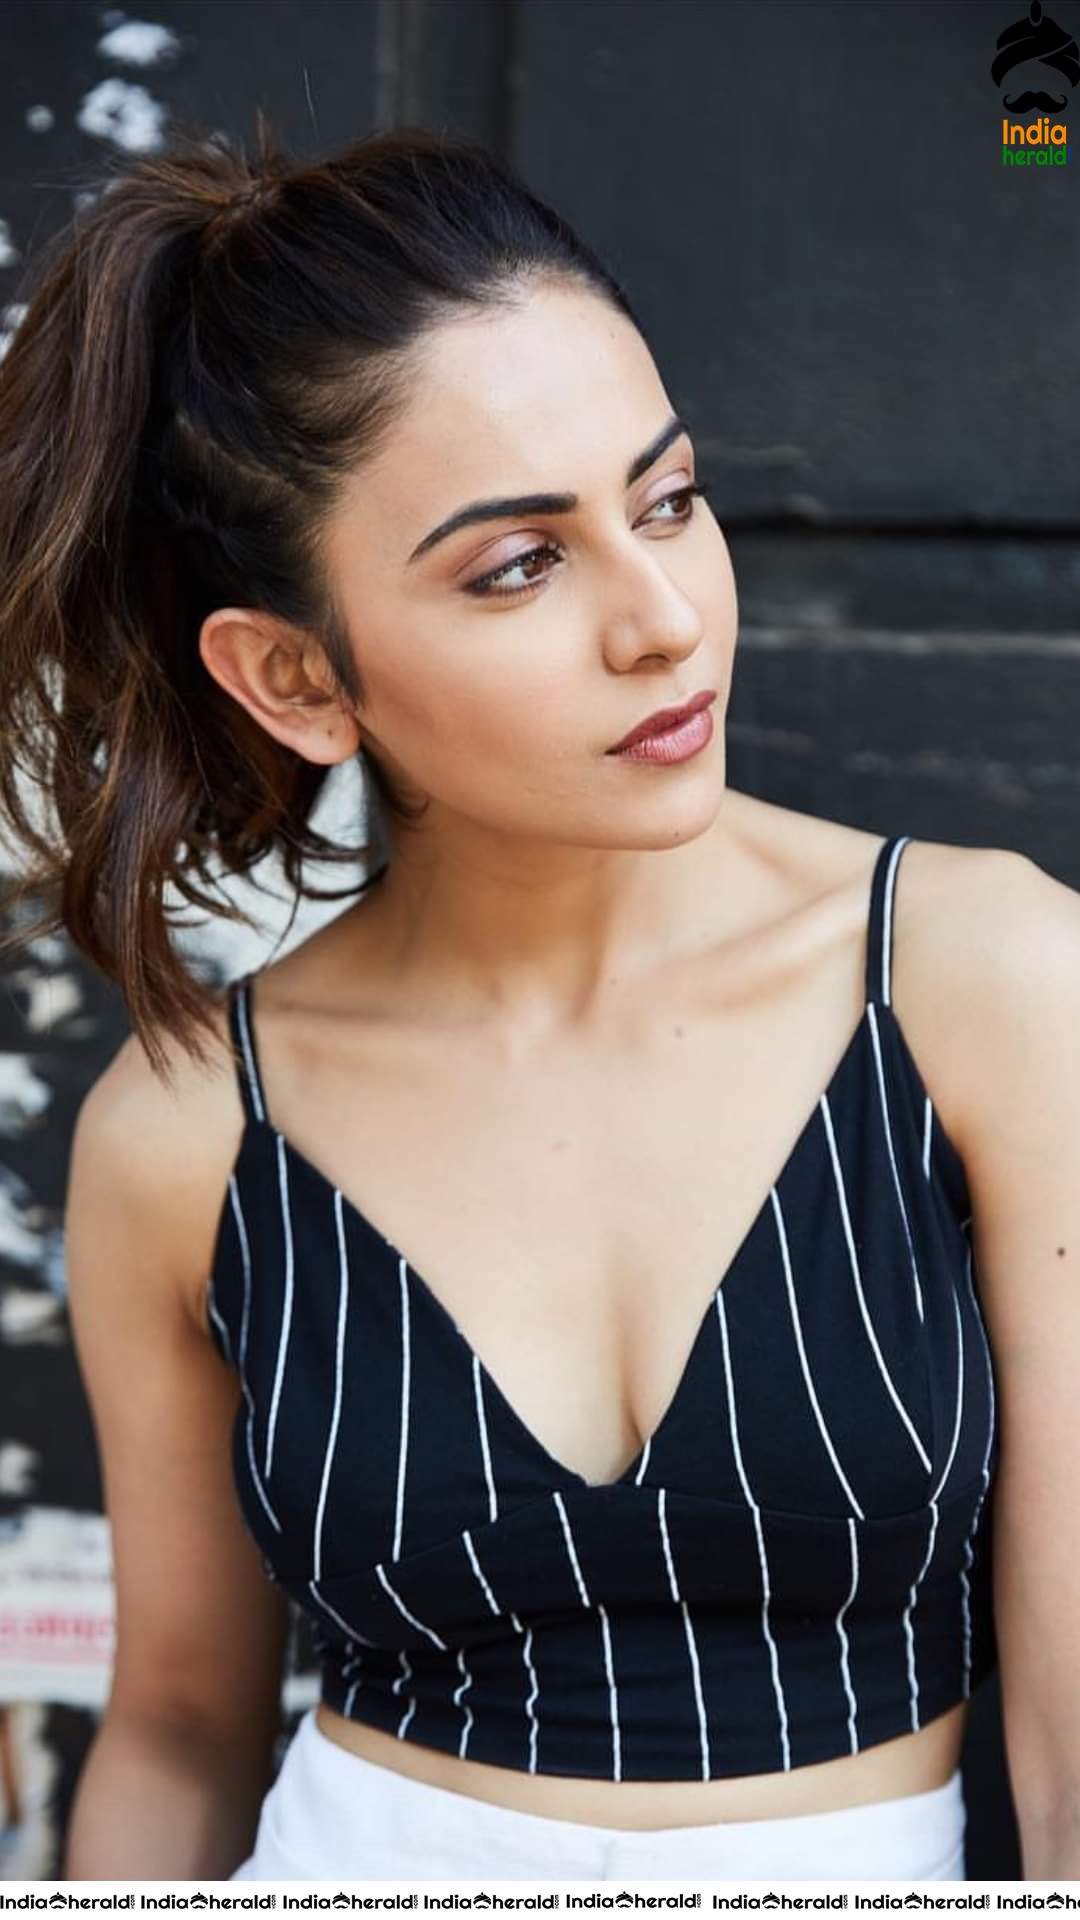 Rakul Preet looks Enthralling and Invitingly Hot in these Photos Compilation Set 3